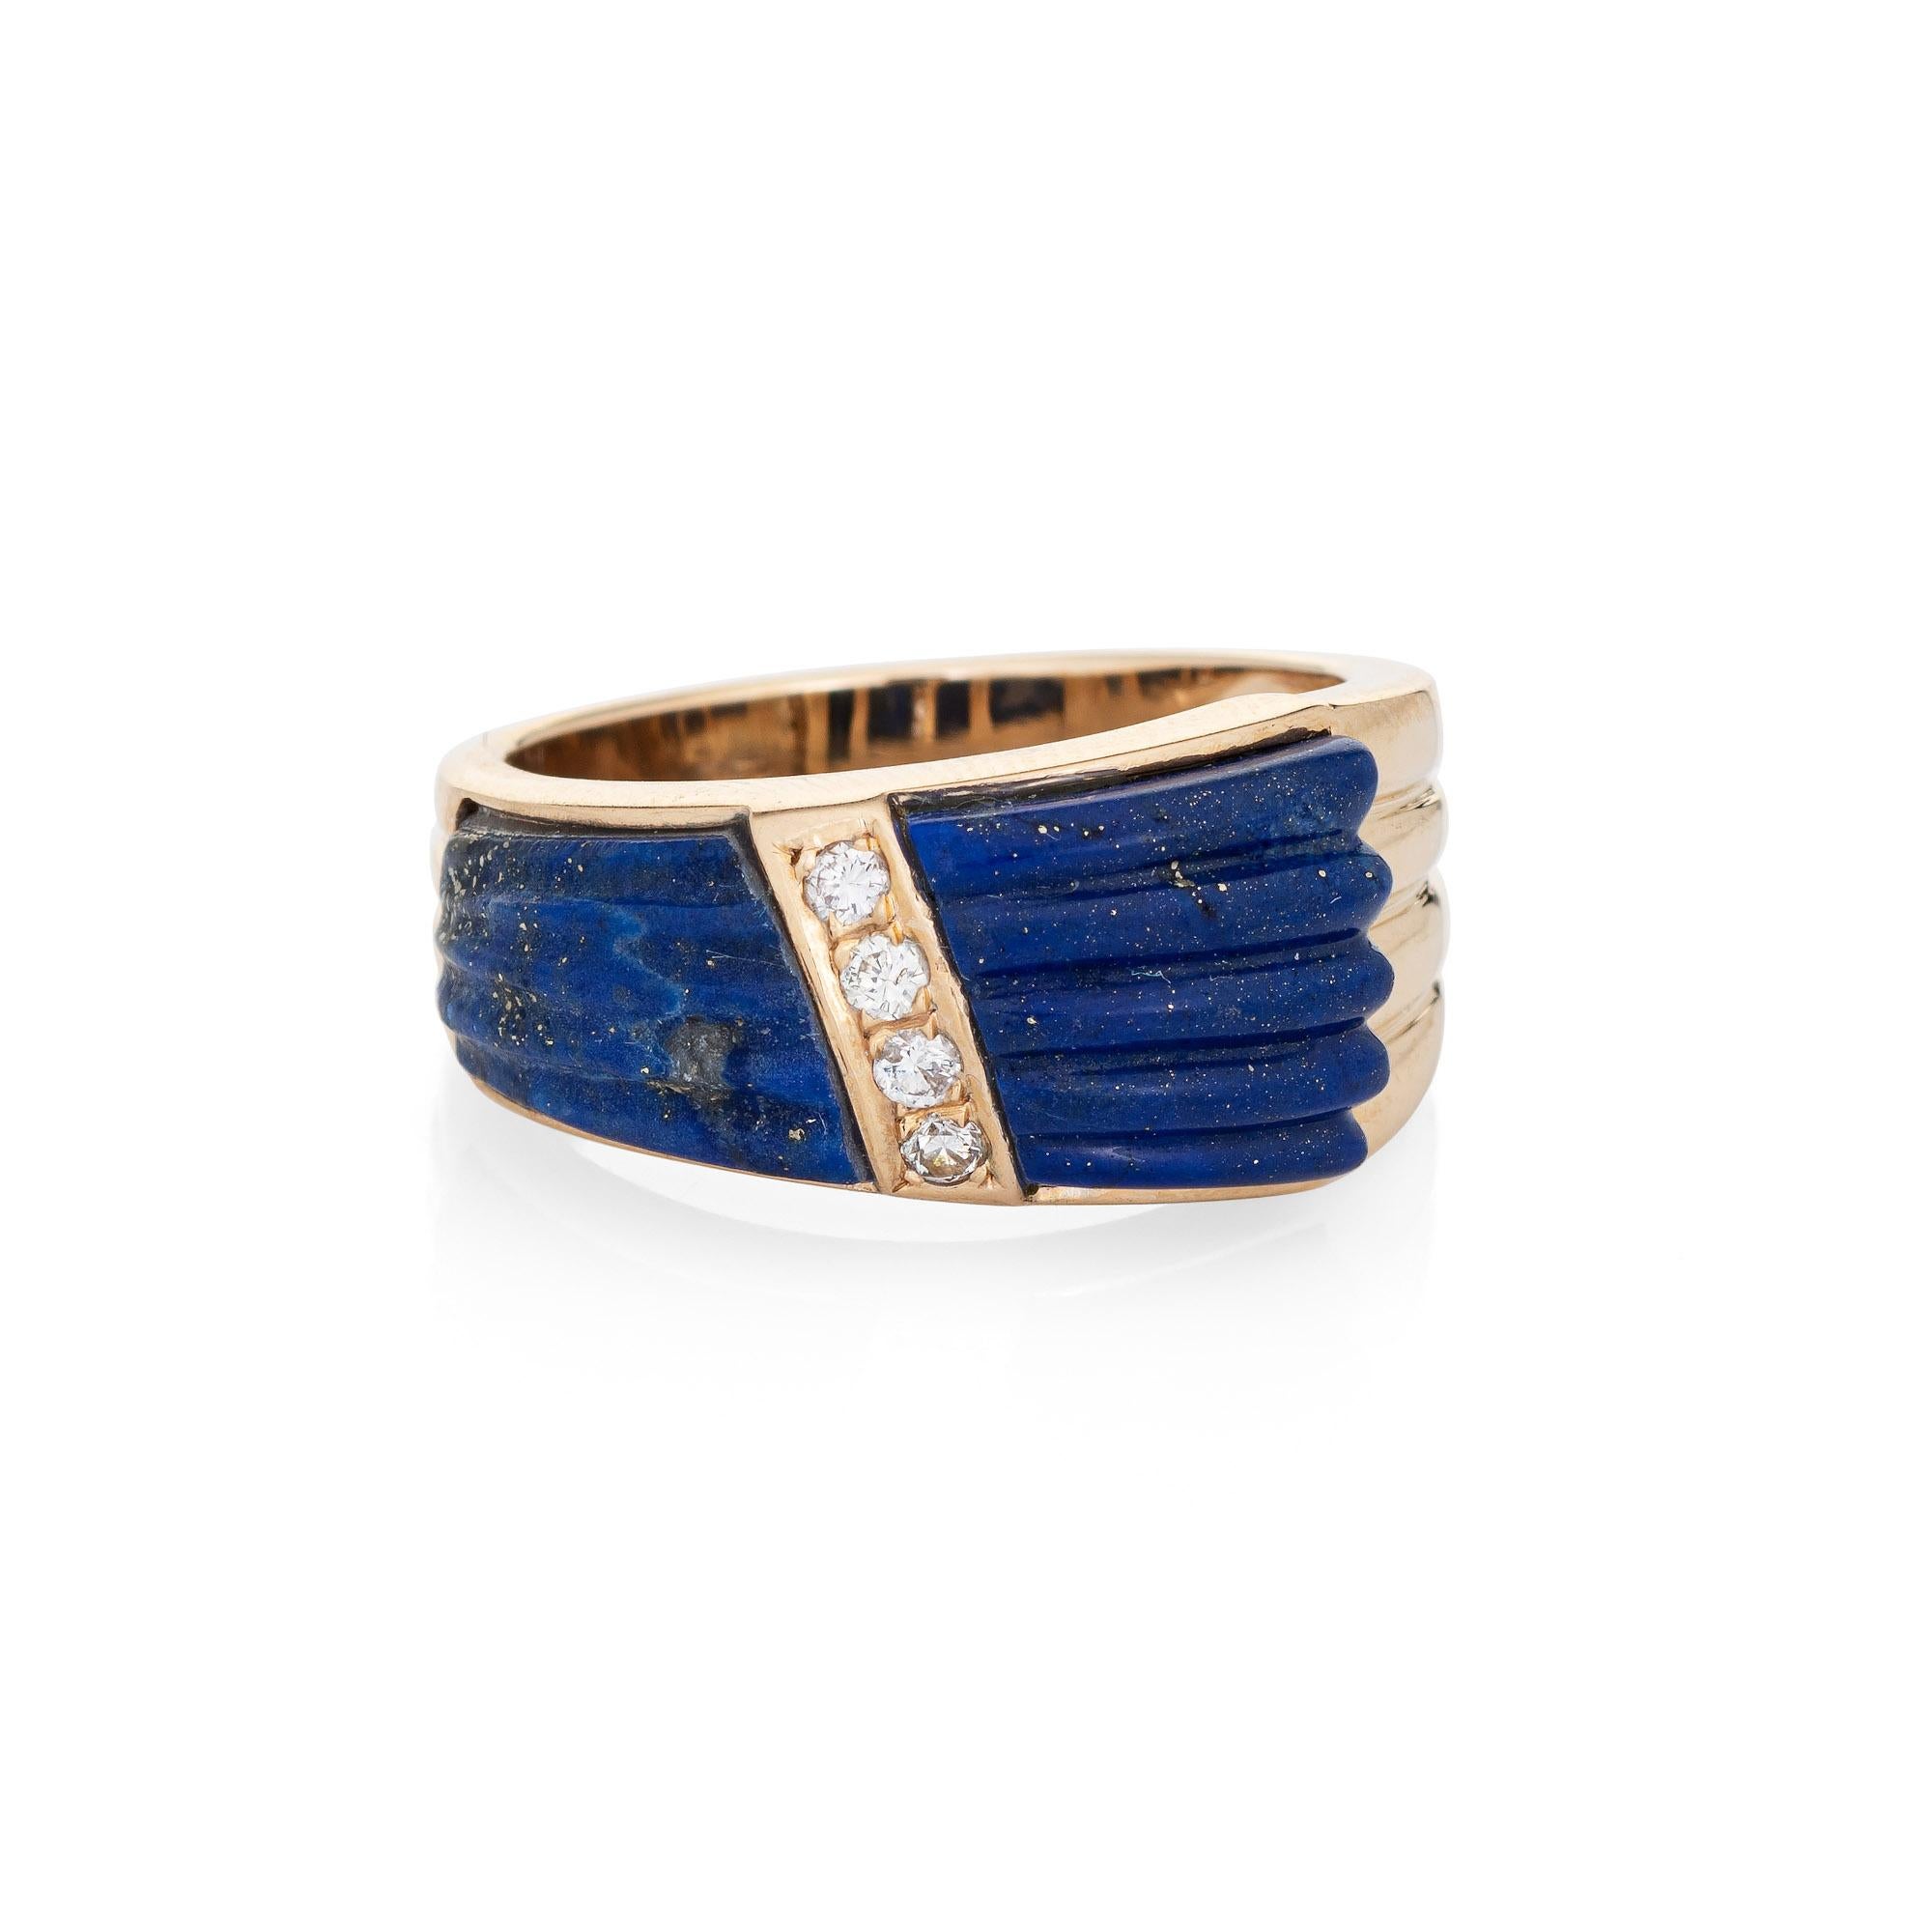 Stylish vintage fluted lapis lazuli & diamond ring (circa 1970s) crafted in 14 karat yellow gold. 

Fluted lapis lazuli measures 25mm x 8mm. Four diamonds total an estimated 0.08 carats (estimated at I-J color and SI1-2 clarity). The lapis is in